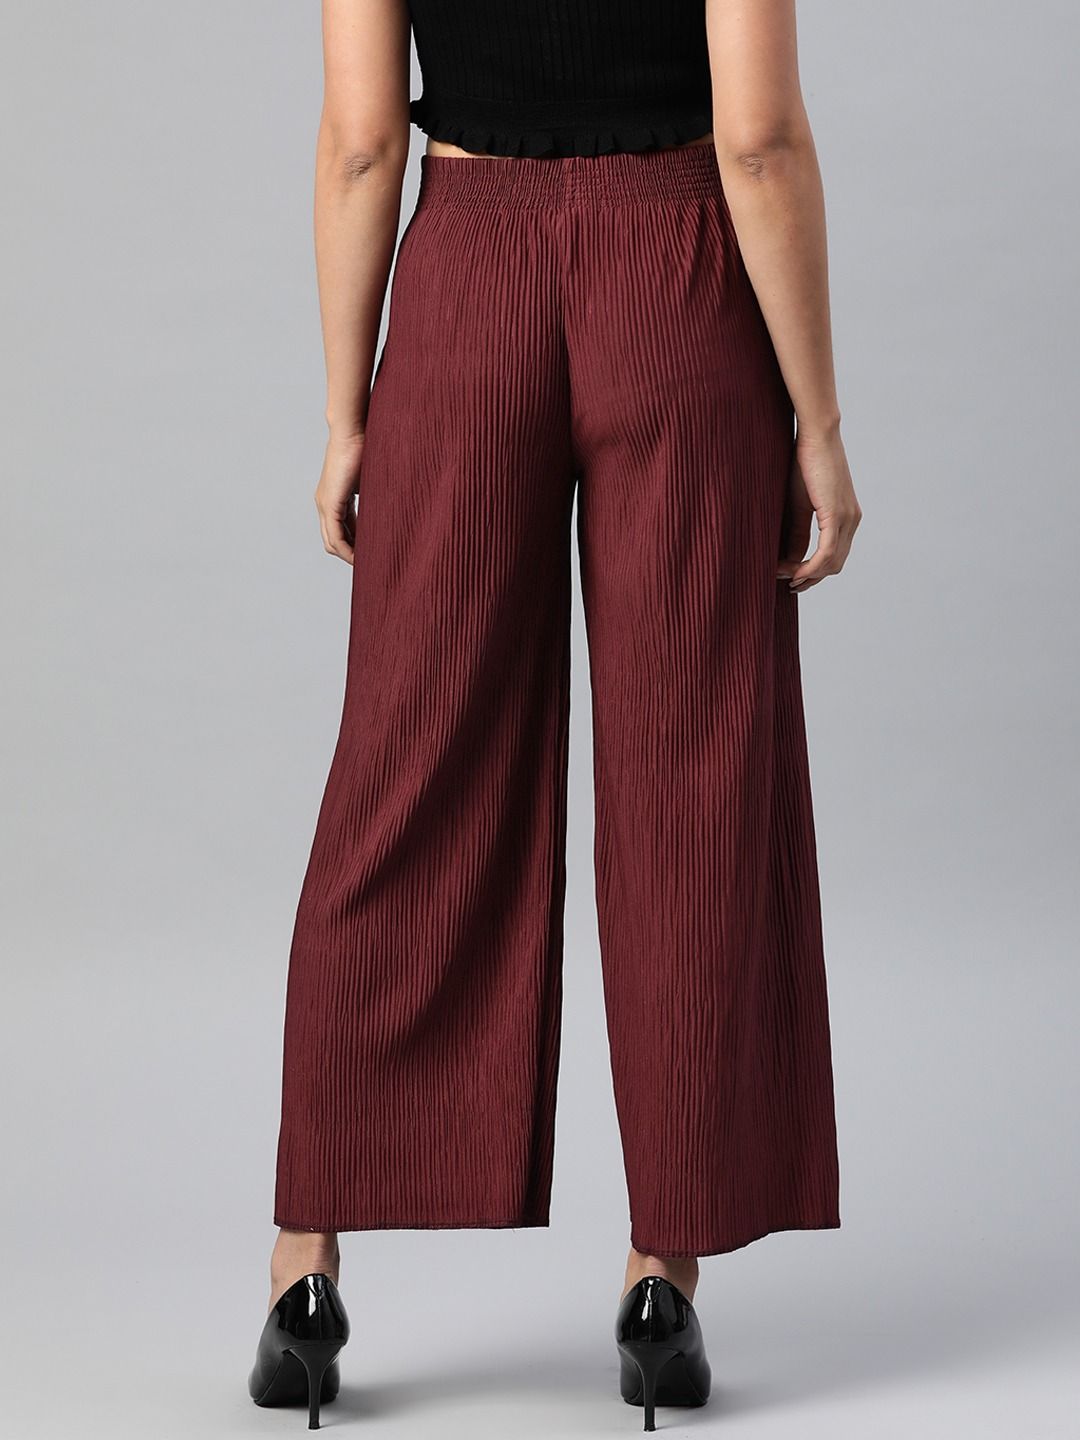 Buy FLYSTER Solid Polyster Blend Palazzo Pant for Women | Slit Cut Stylist  Women's Palazzo | Regular Fit | Perfect for Party, Office Wear, Casual Wear  (XL, Mango) at Amazon.in